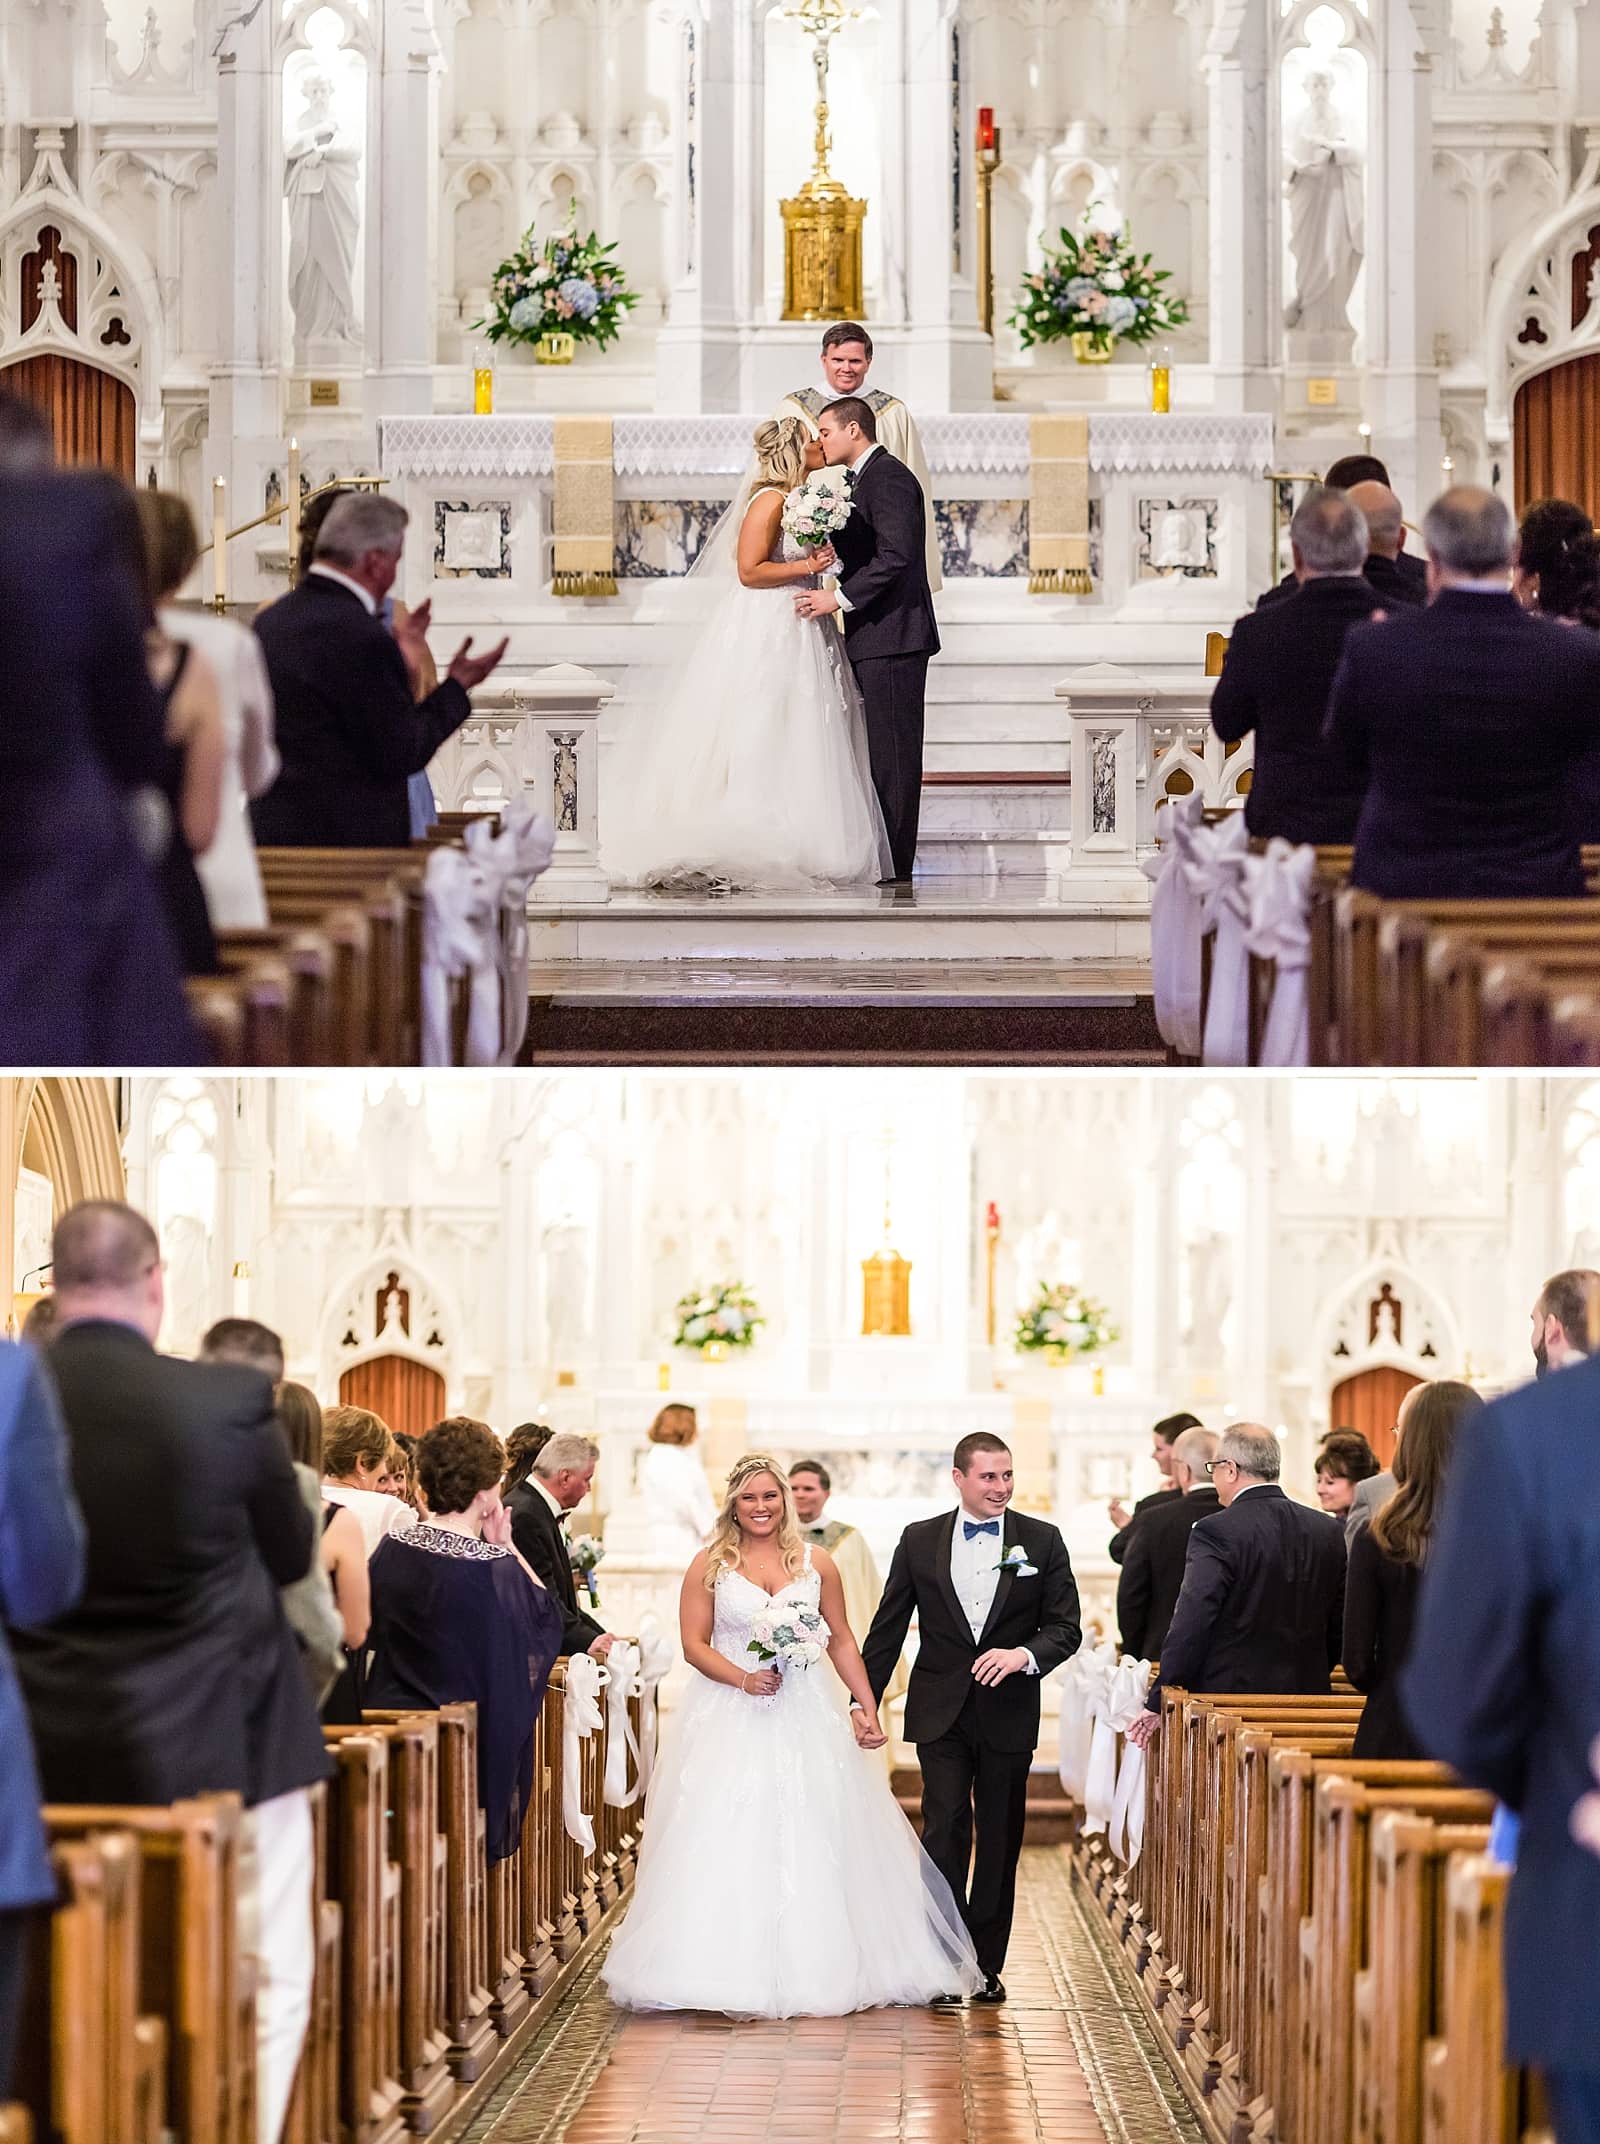 Bride & Groom embrace before walking down the aisle during a catholic wedding mass at St Matthew's Church in Conshohocken.